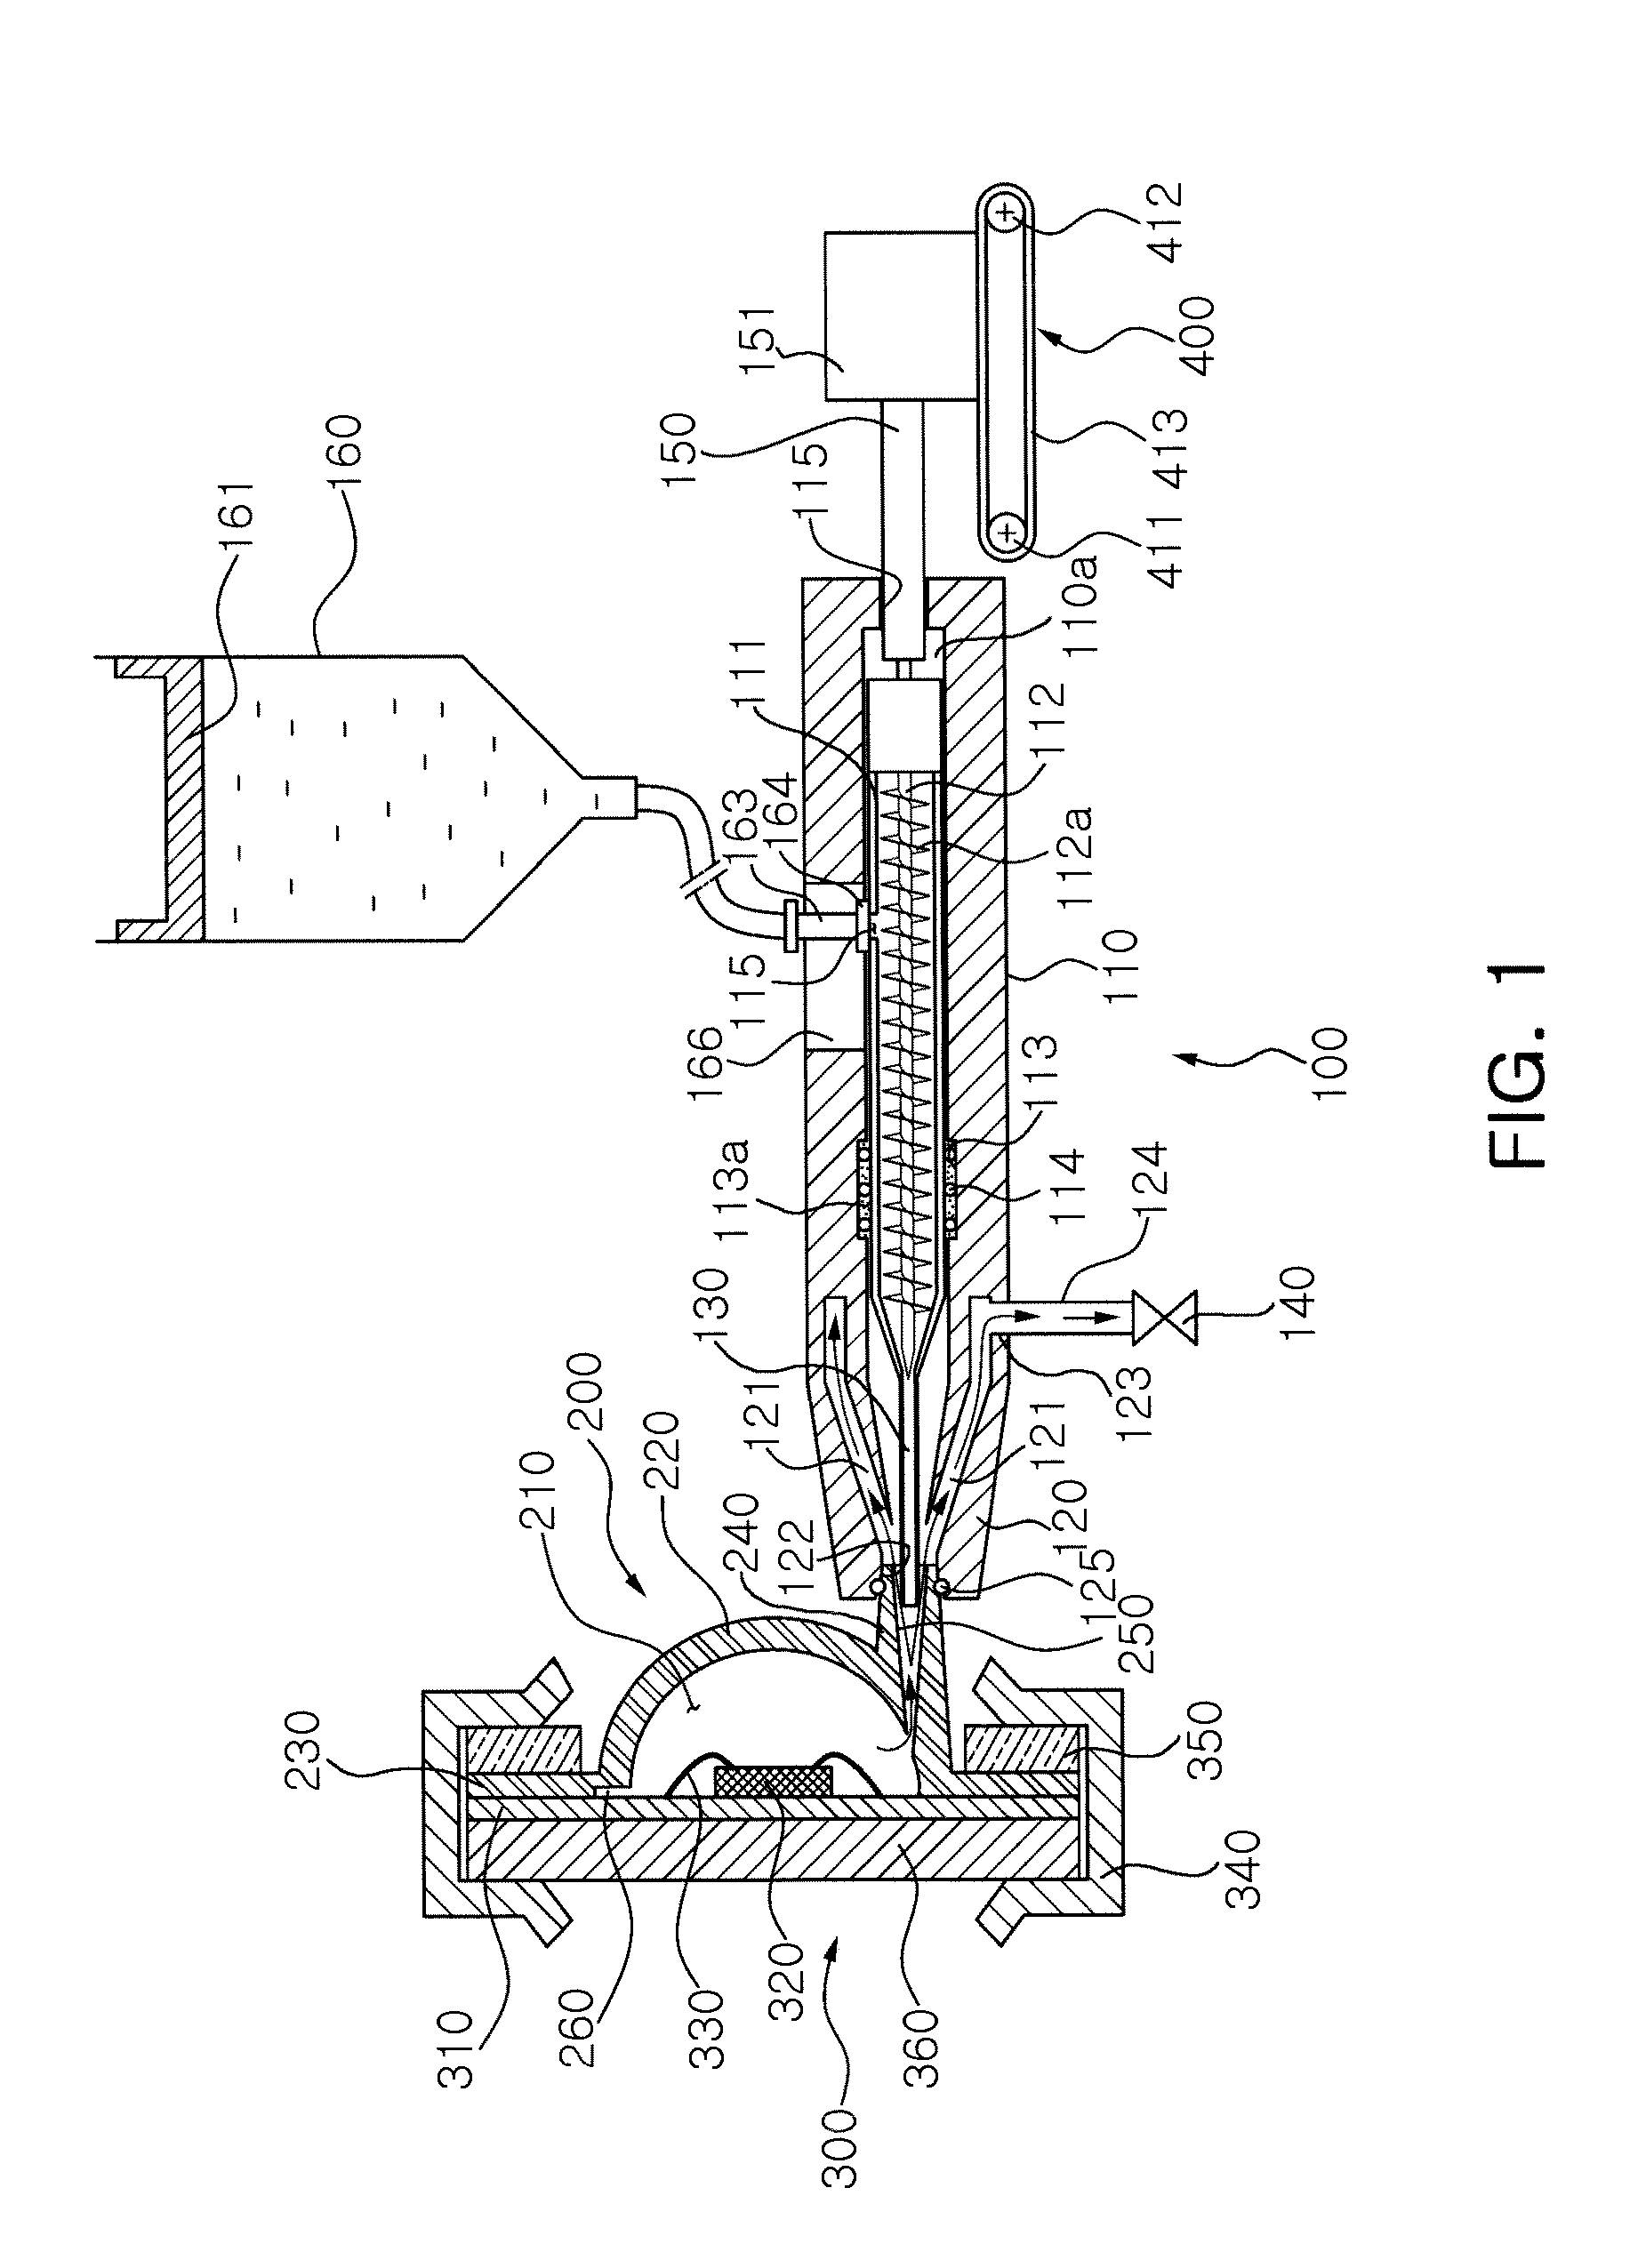 Lens fabrication apparatus and lens fabrication method using the same